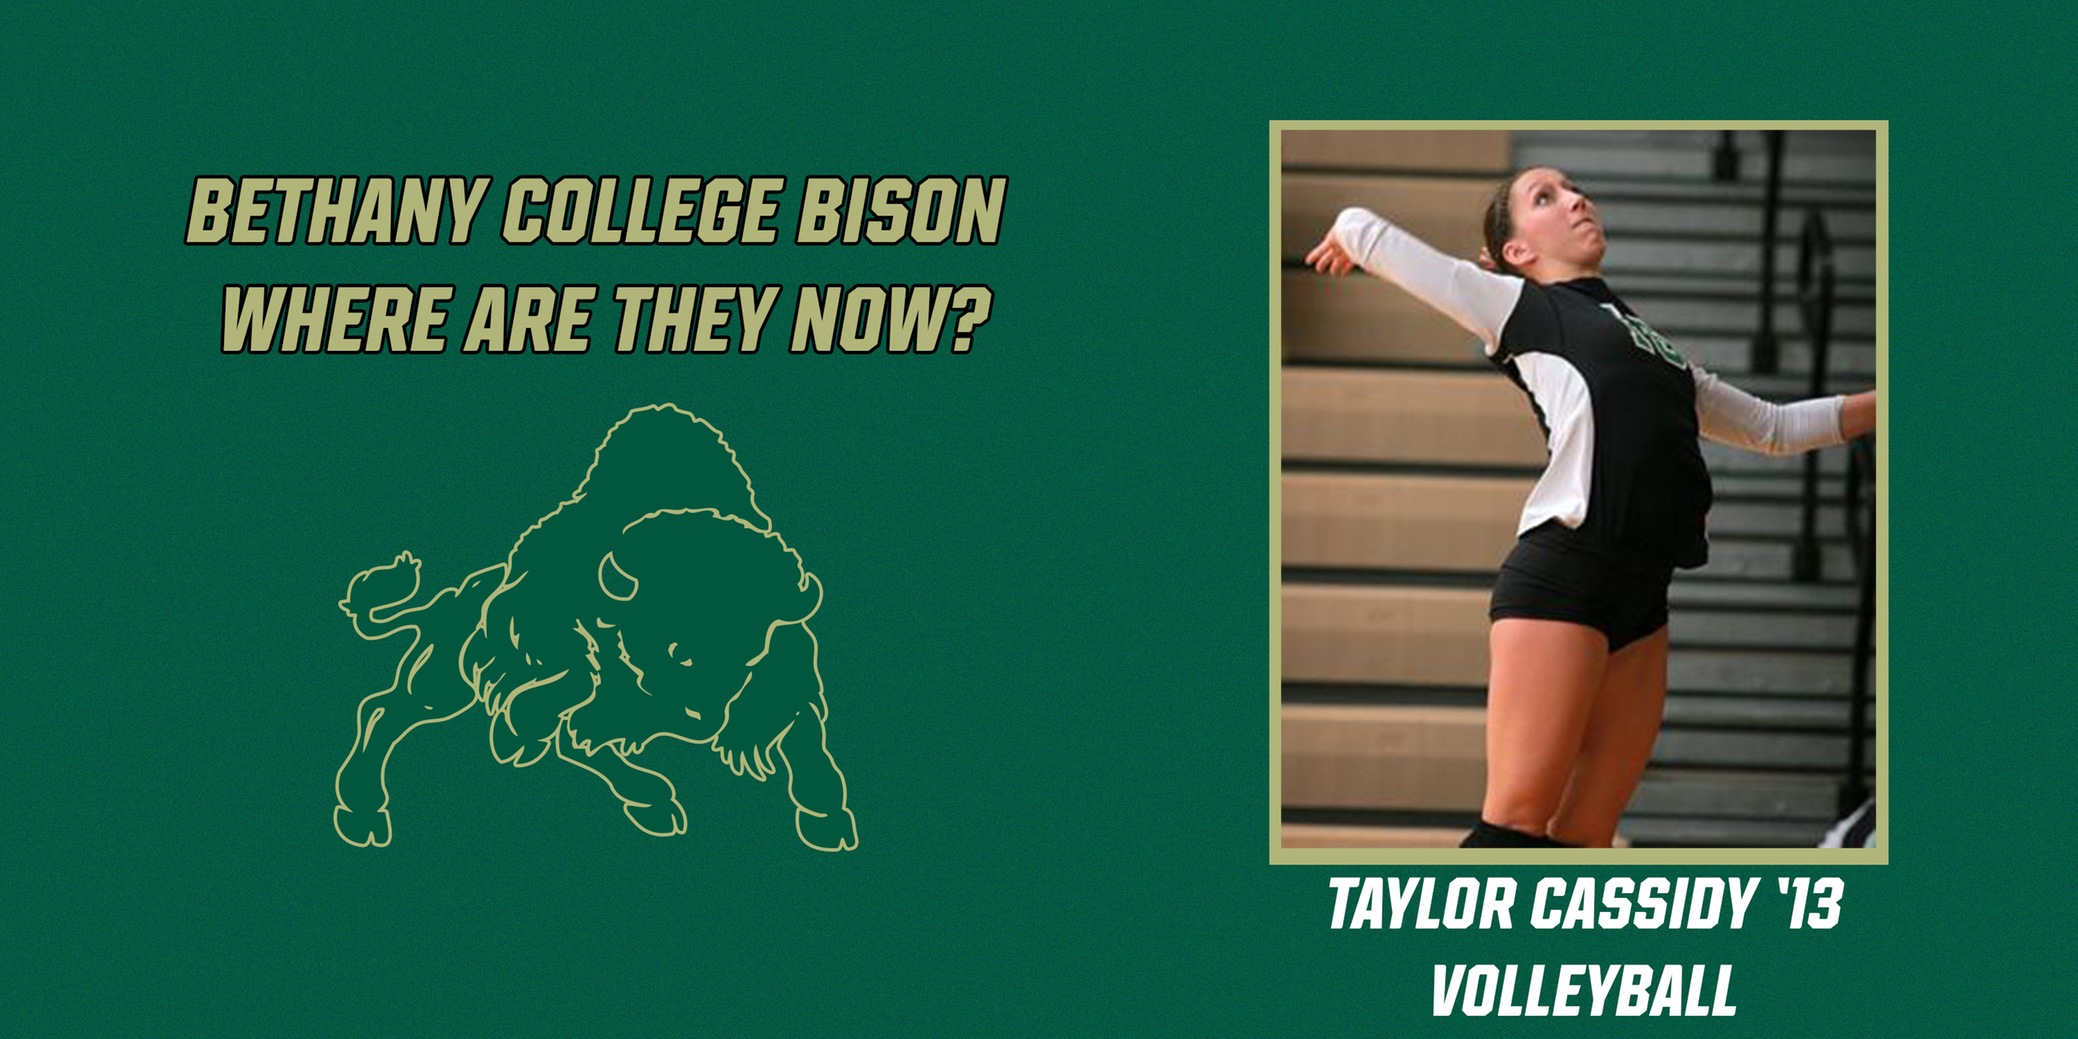 Where Are They Now Series - Taylor Cassidy '13, Women's Volleyball